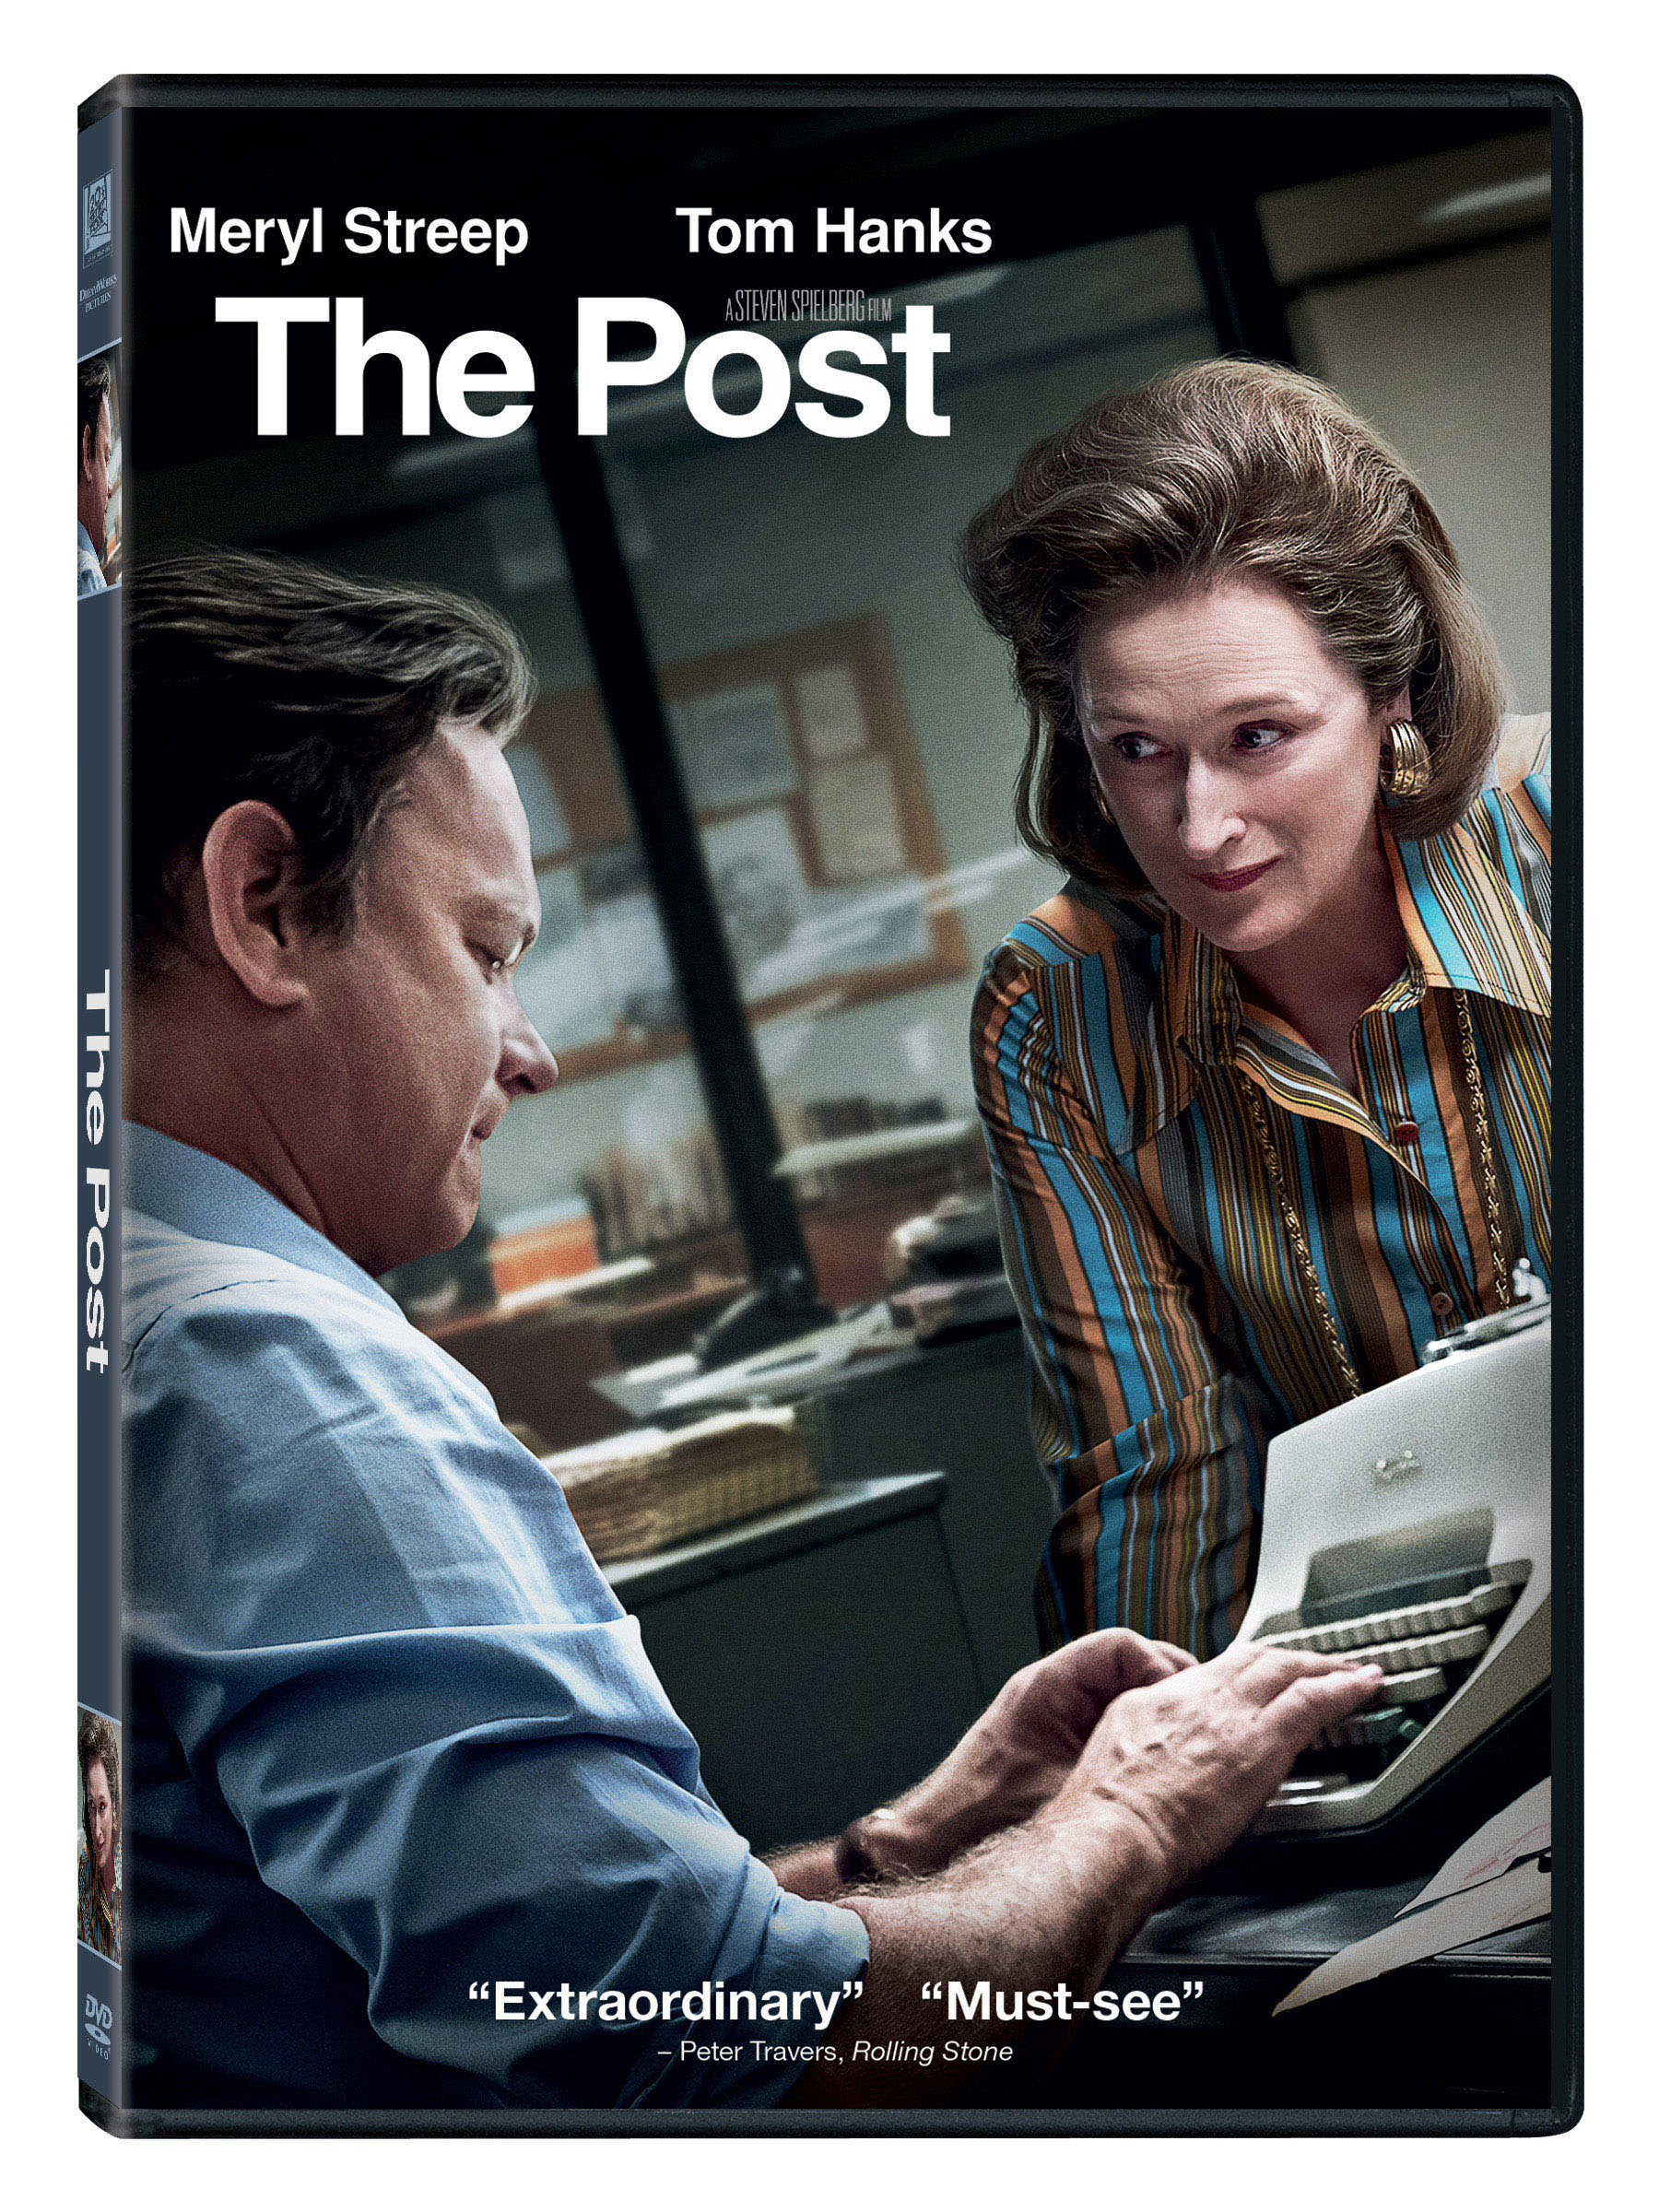 The Post DVD cover (20th Century Fox Home Entertainment)